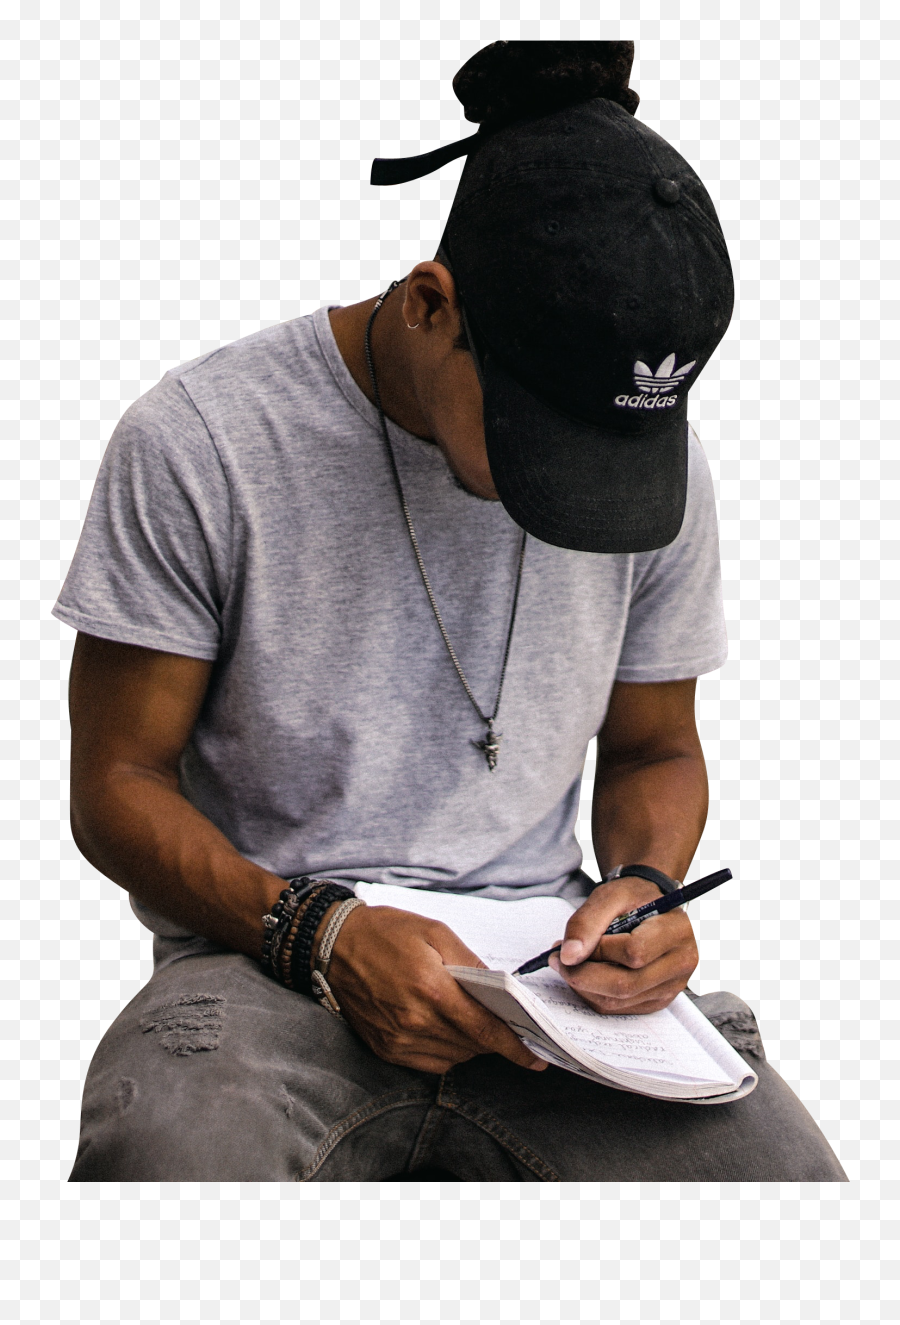 Download Free Png Man With Cap Writing Transparent - Man Writing Transparent,Baseball Cap Transparent Background